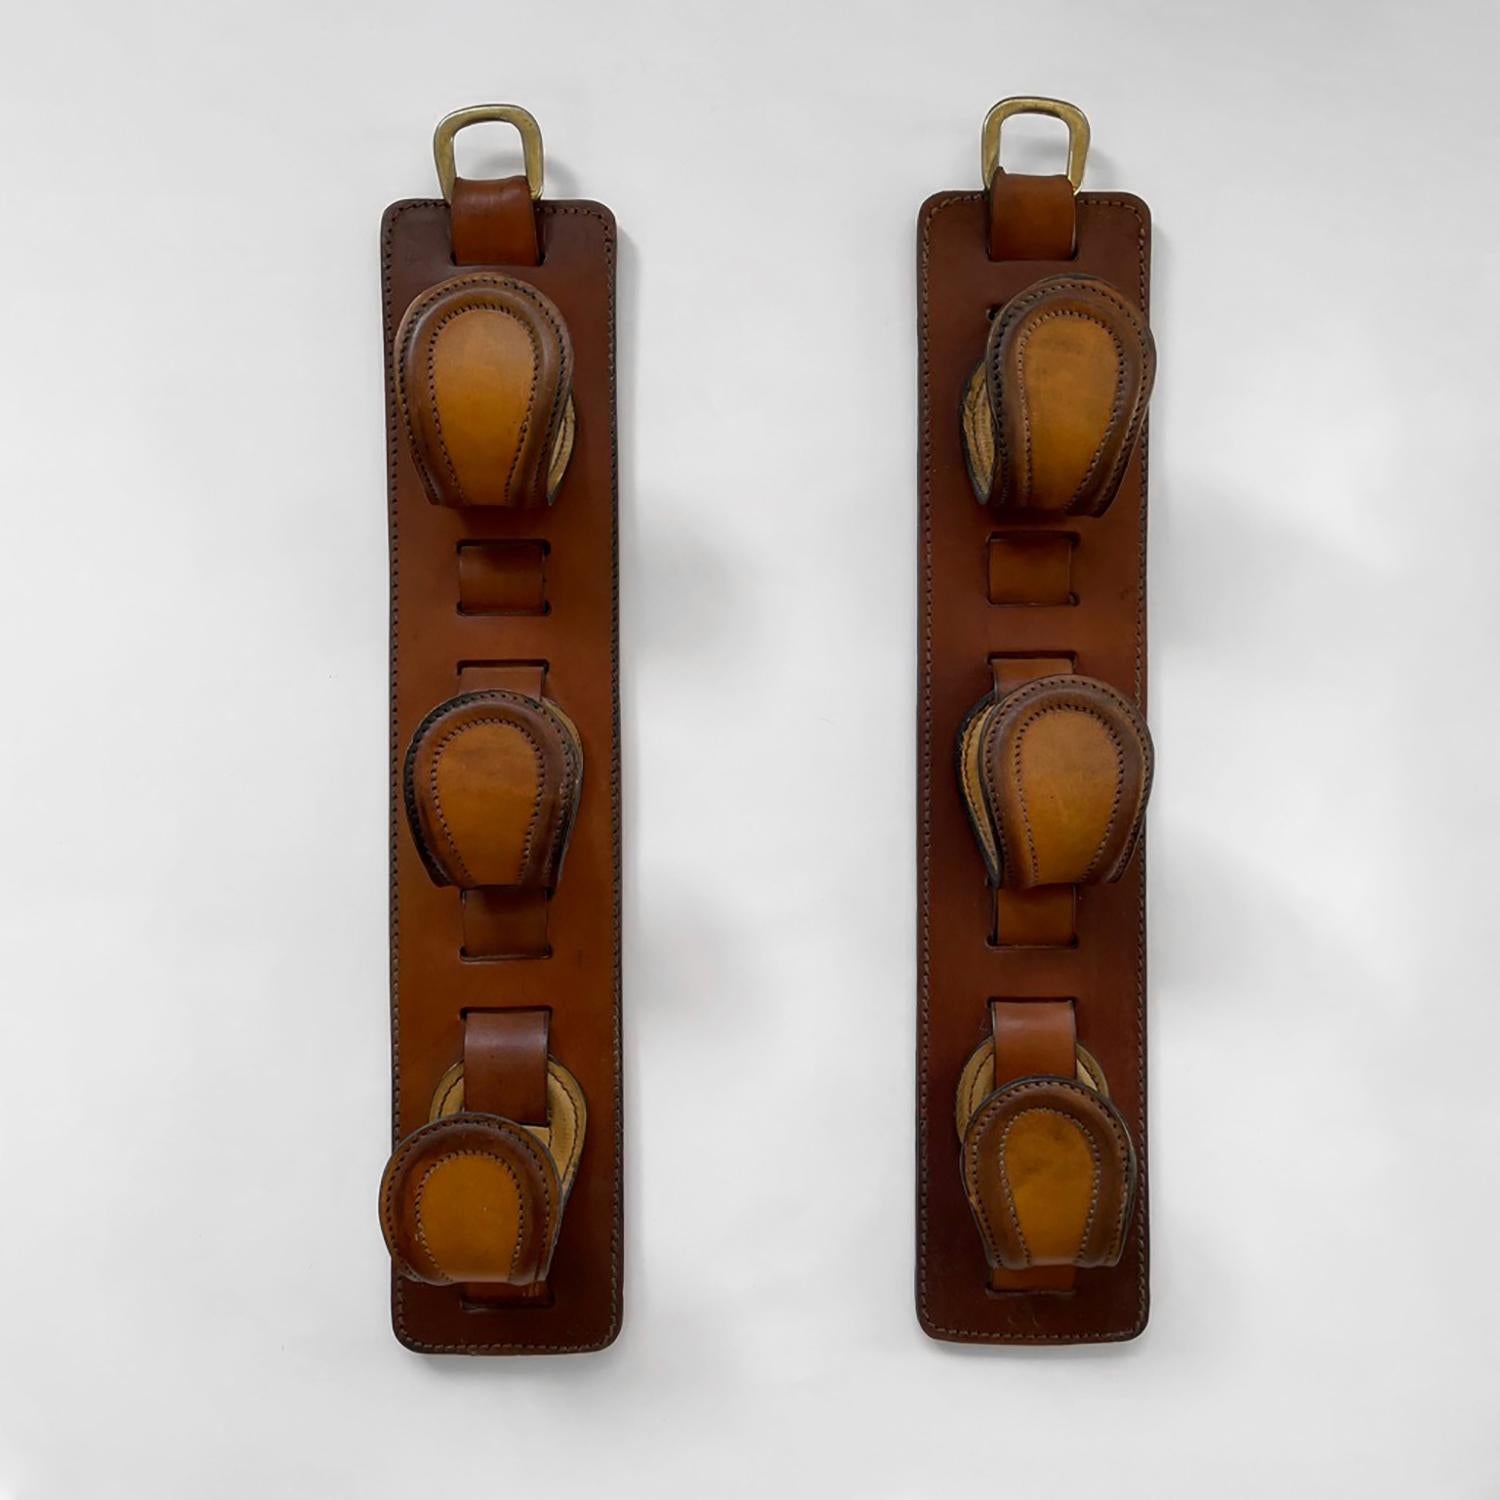 French leather wall hooks in the style of Jacques Adnet
Saddle leather triple tongue hooks on aged leather panel with contrast stitching
Aged brass ring for wall mounting
Beautiful equestrian and hunting wall storage
Patina from age and use
Priced